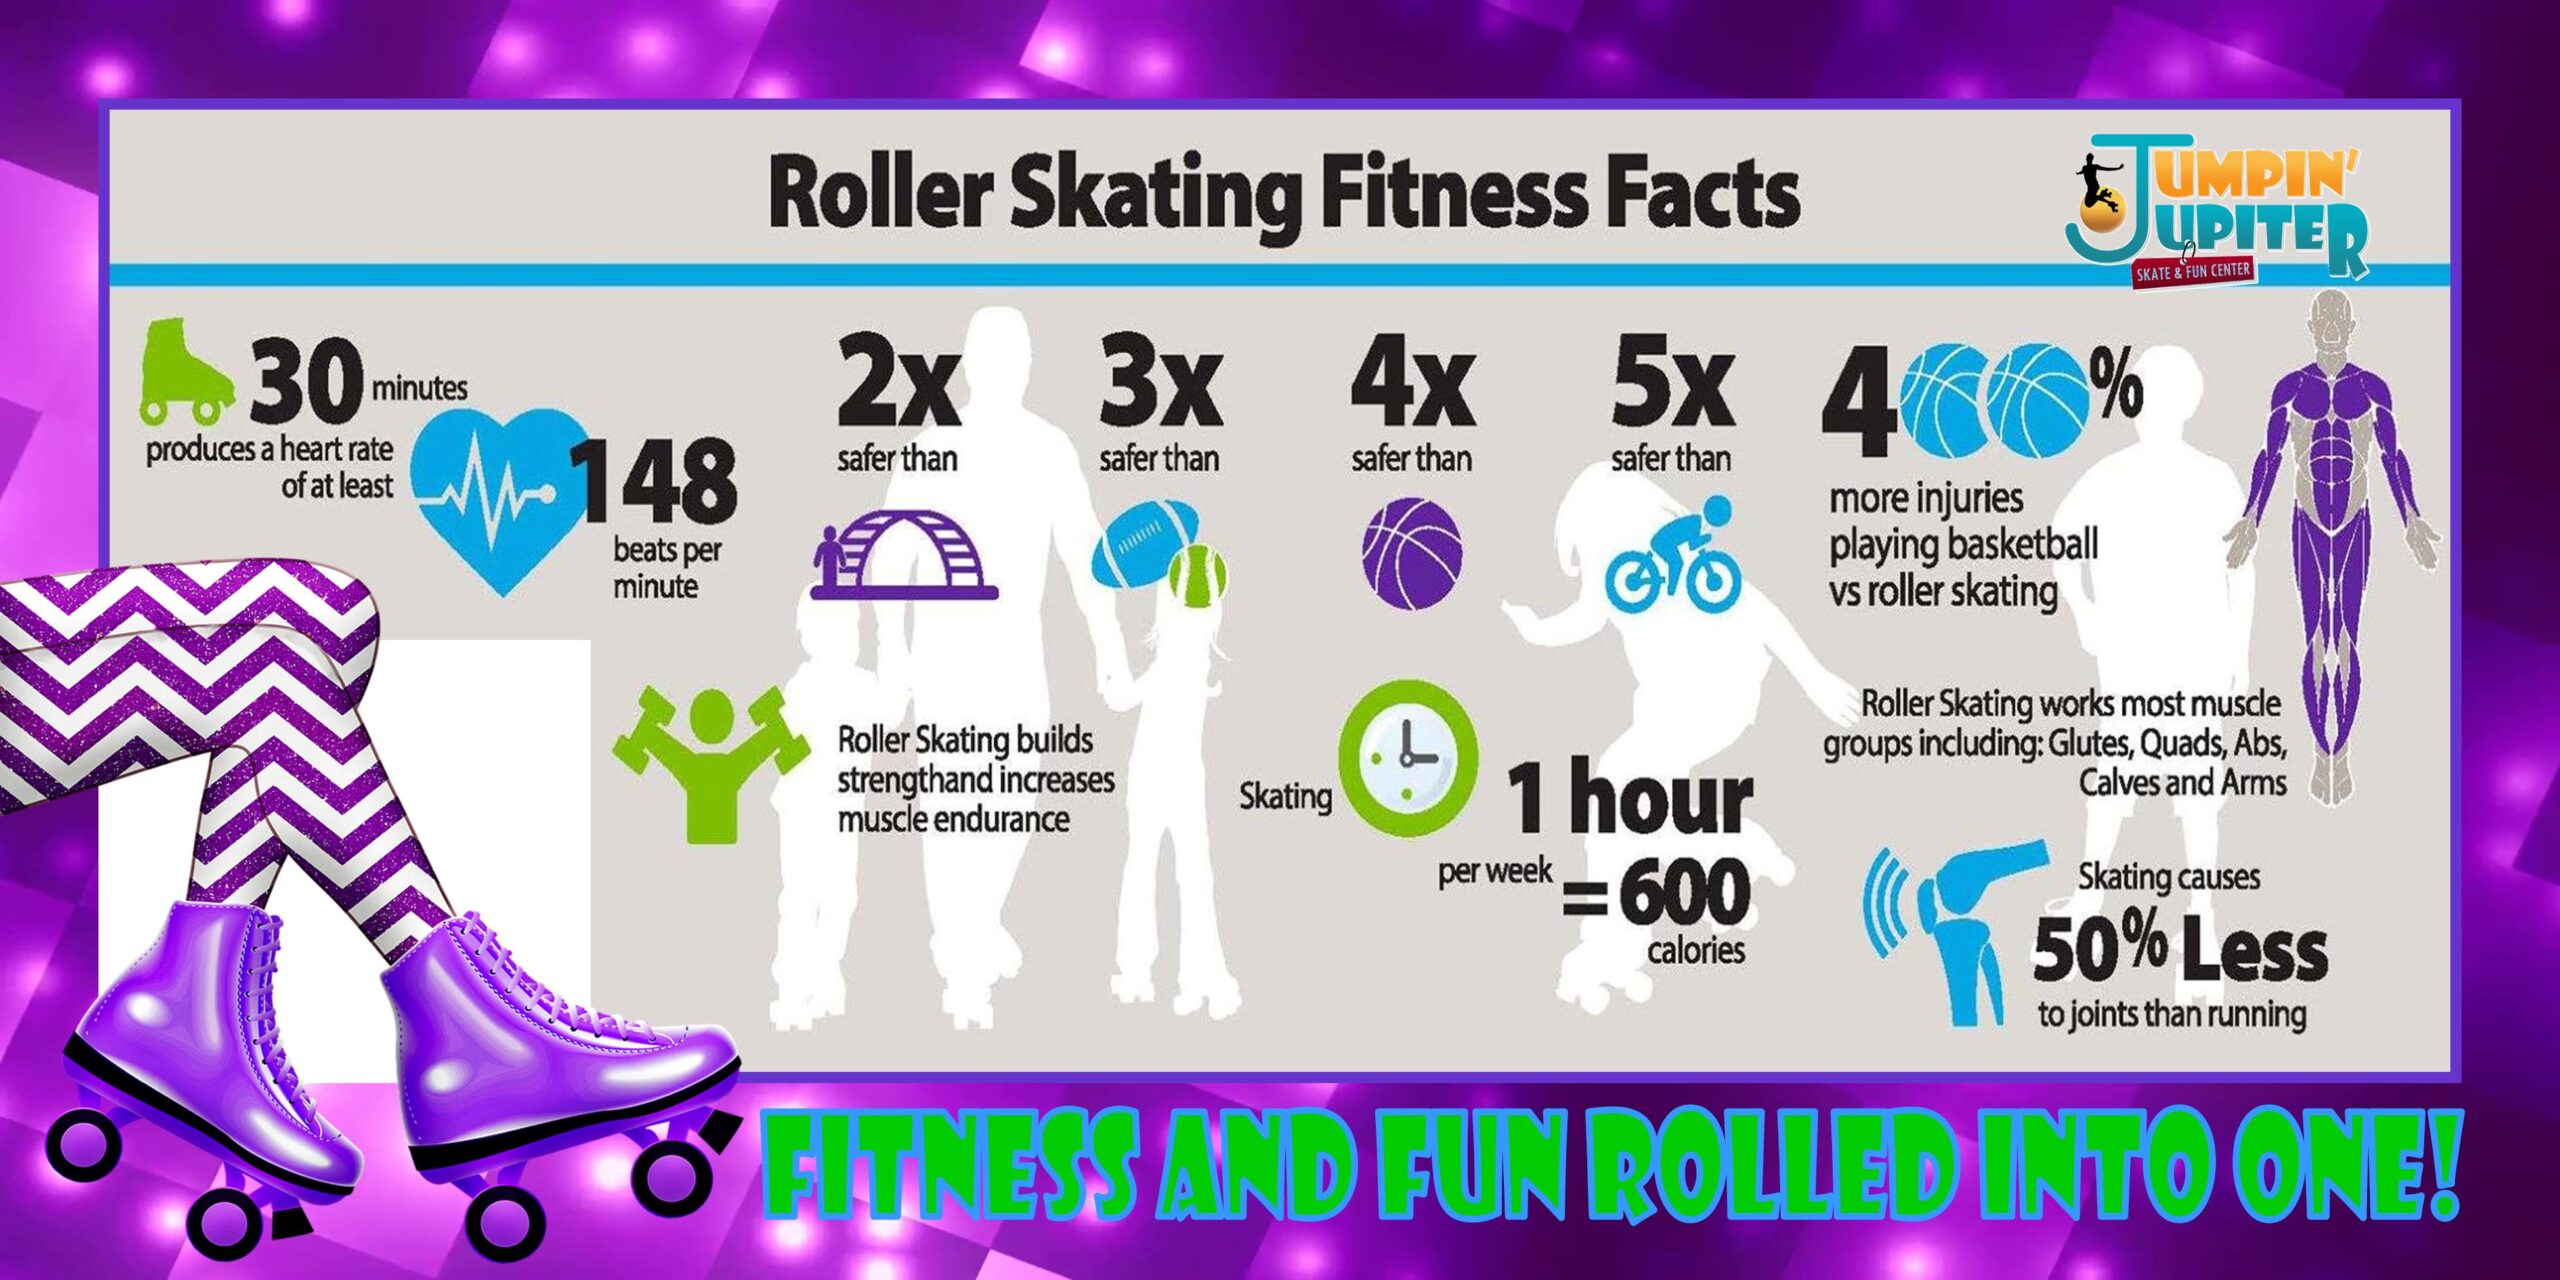 Roller Skating Fitness Facts